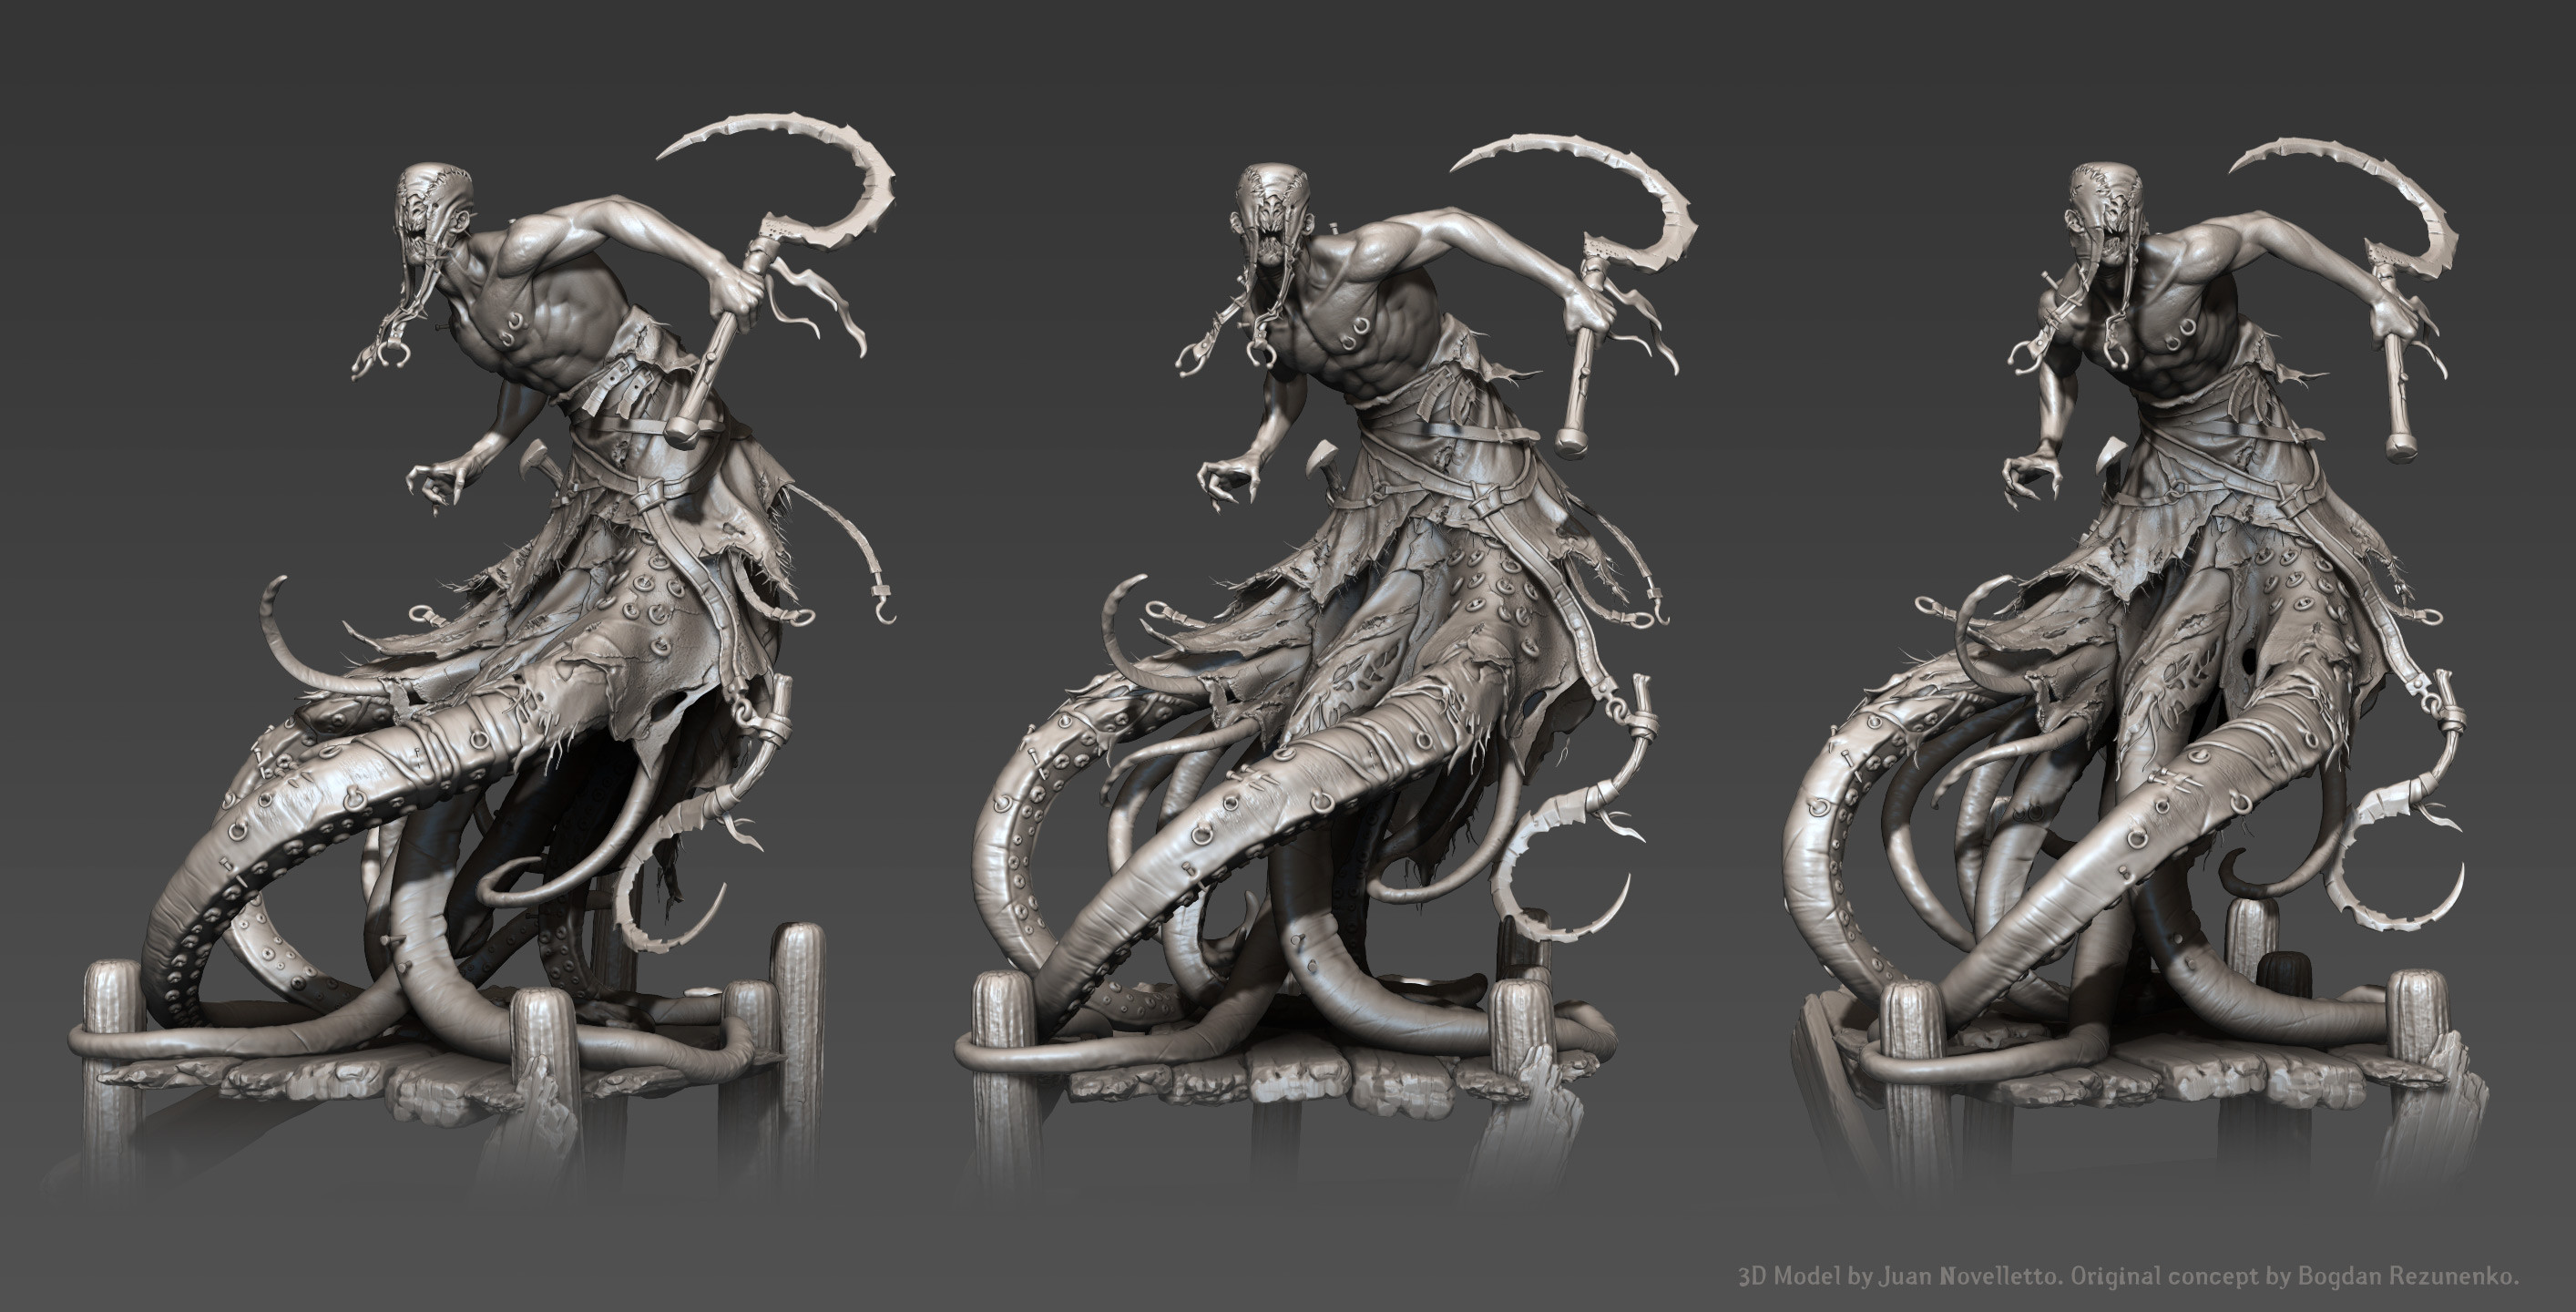 ZBrush renders with a base that I discarded.